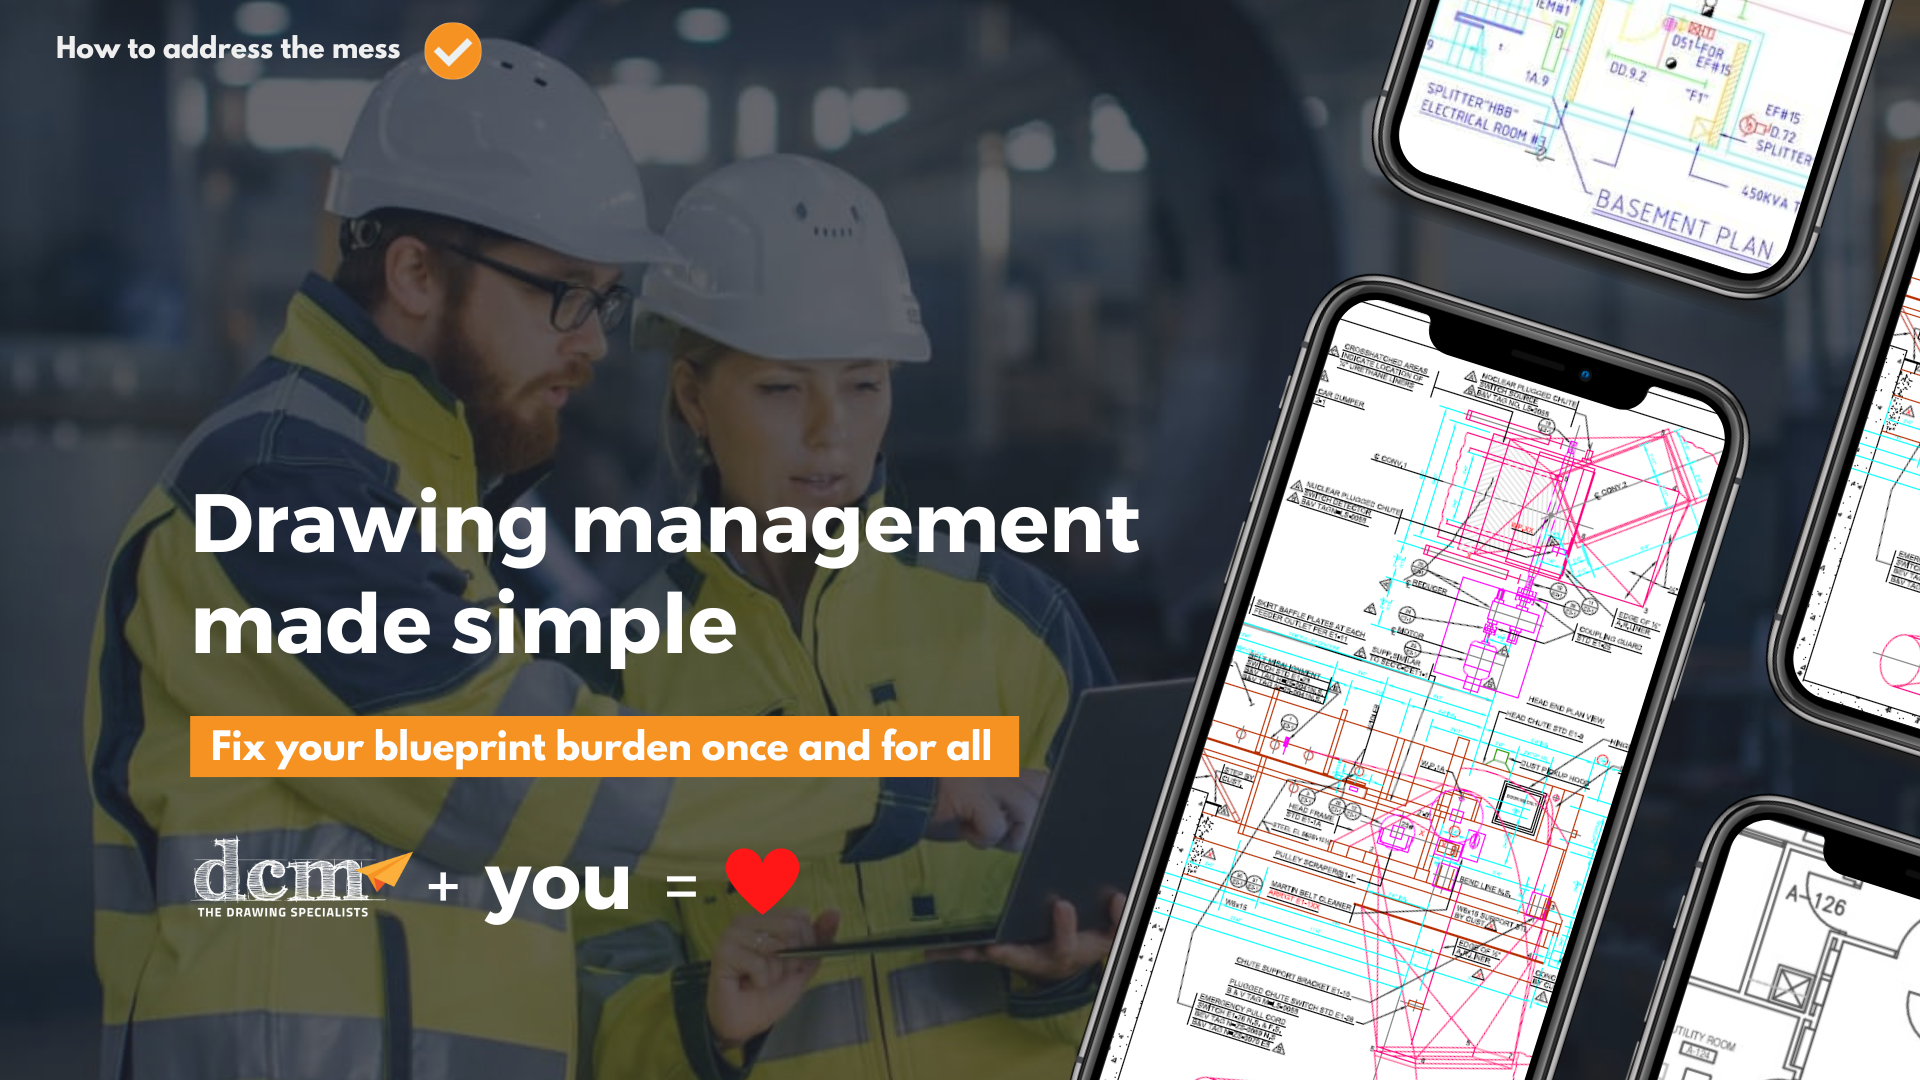 Andreas DRAWING MANAGEMENT MADE SIMPLE